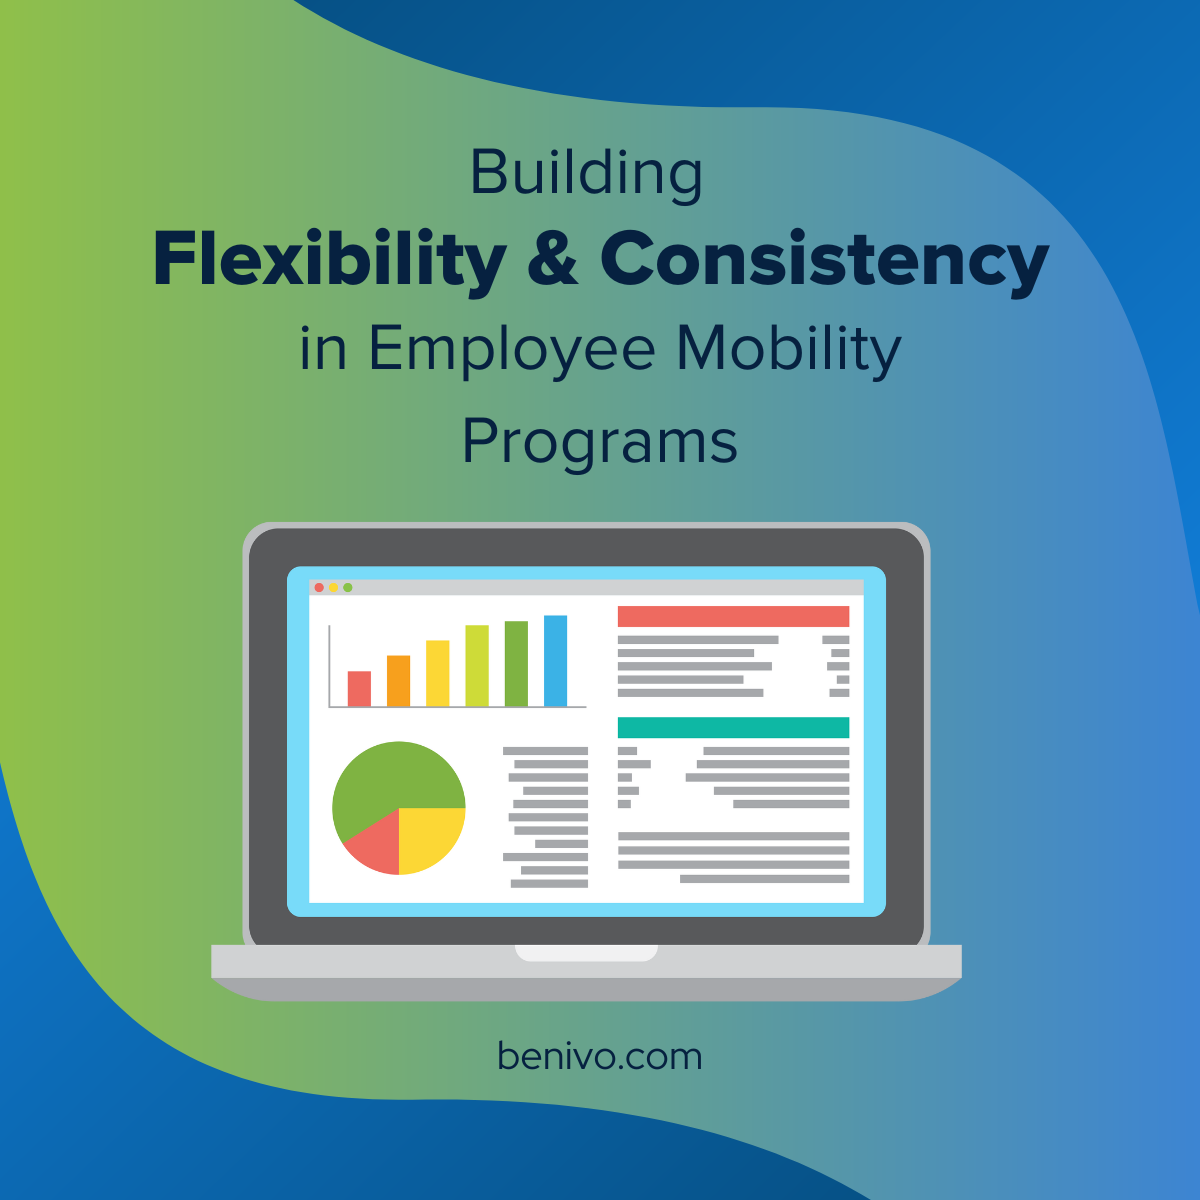 Balancing Flexibility and Consistency in Employee Mobility Programs